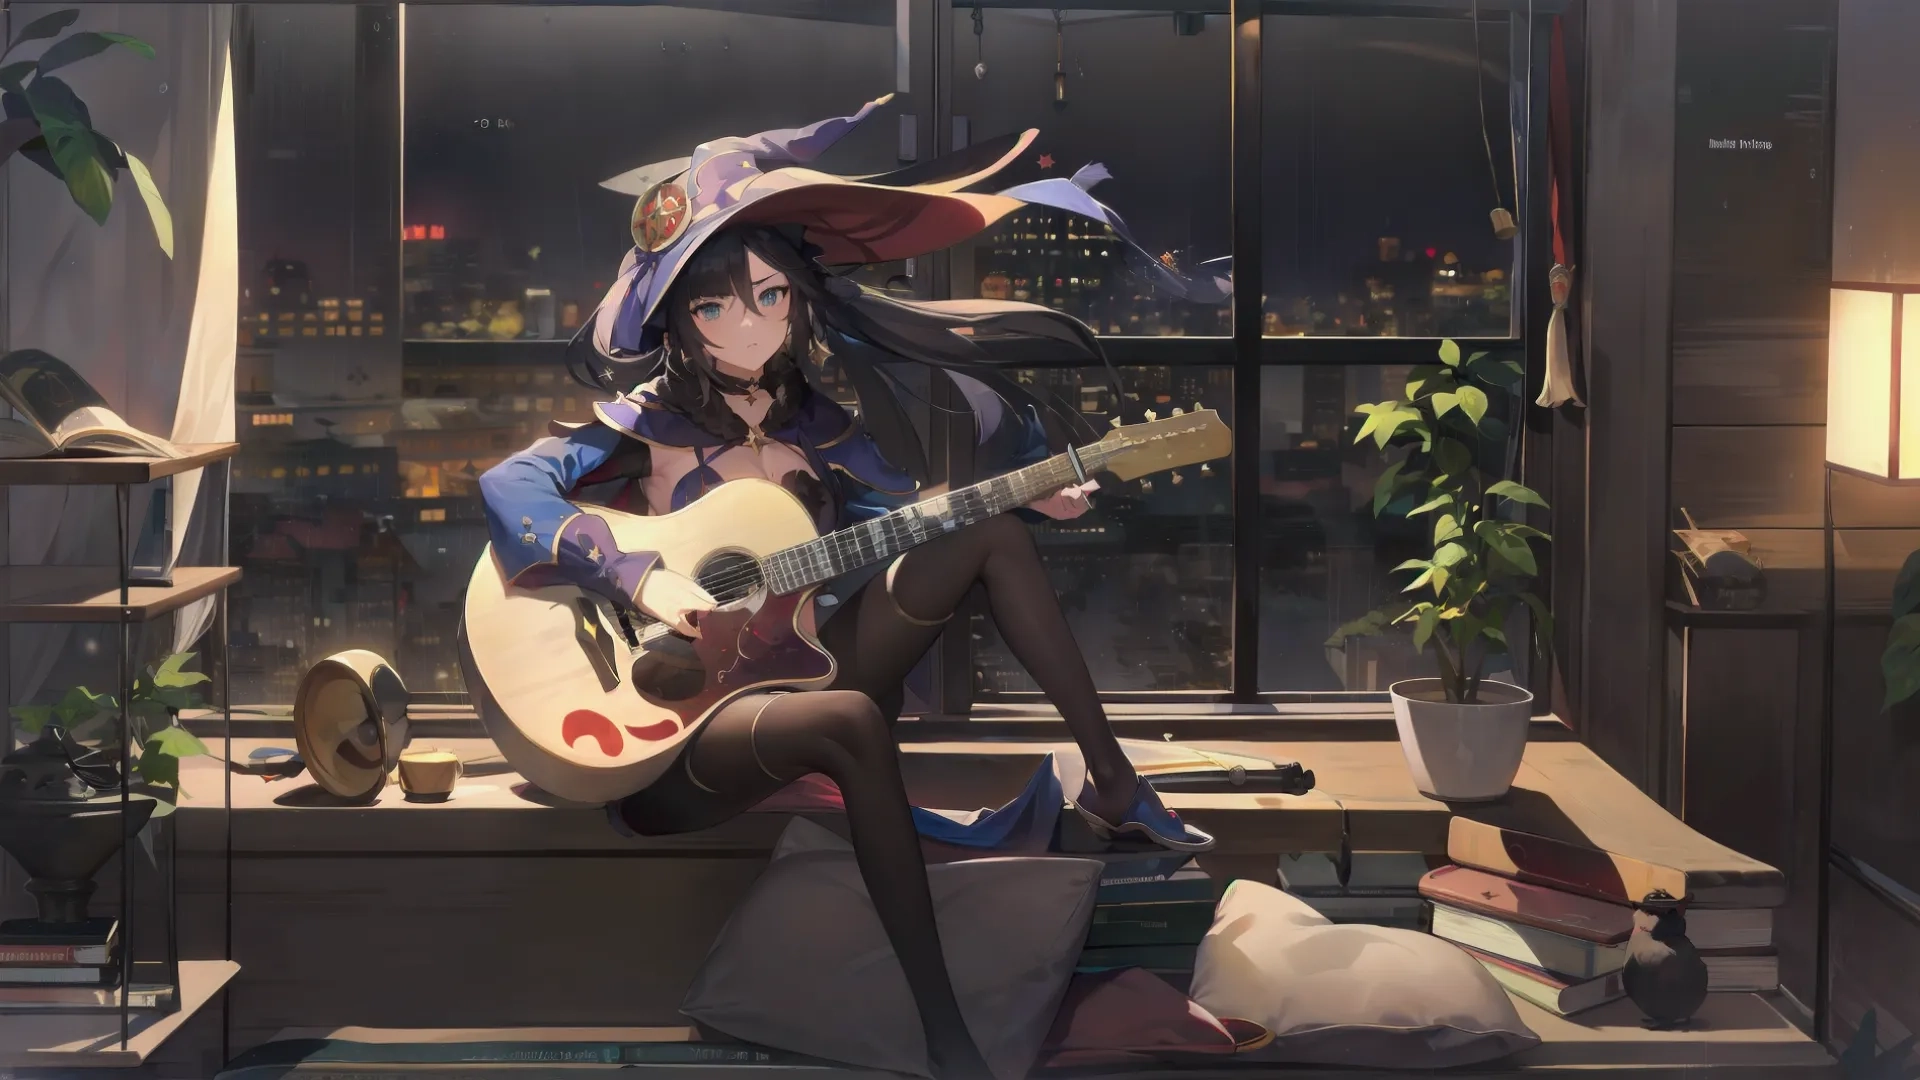 anime girl playing guitar in a sunny city setting at night with clock face on wall and desk desk behind her, beside plant and bookshelveske
